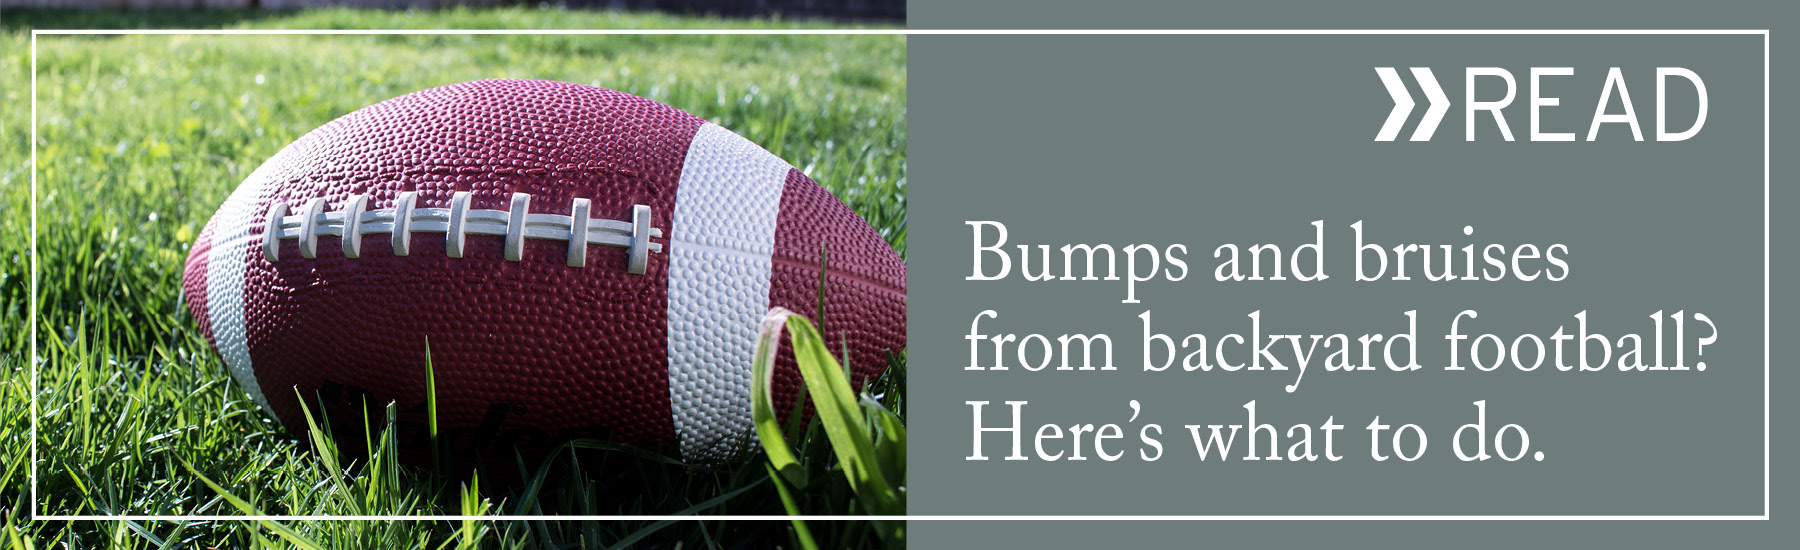 READ: bumps and bruises from backyard football? Here's what to do.